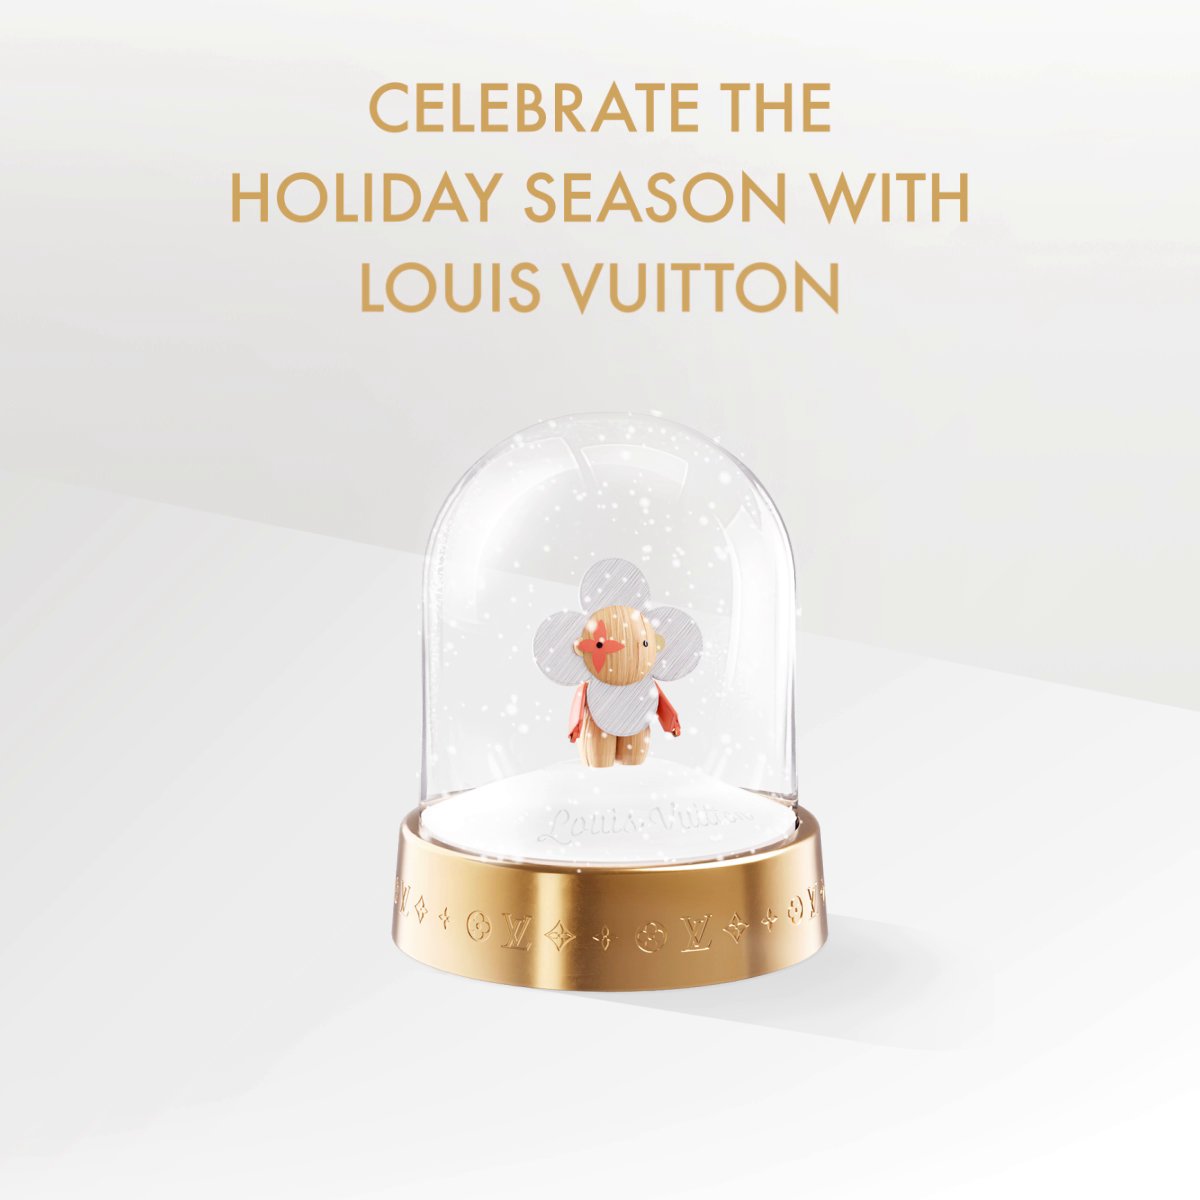 Louis Vuitton on X: Spread the holiday spirit. Share your holiday